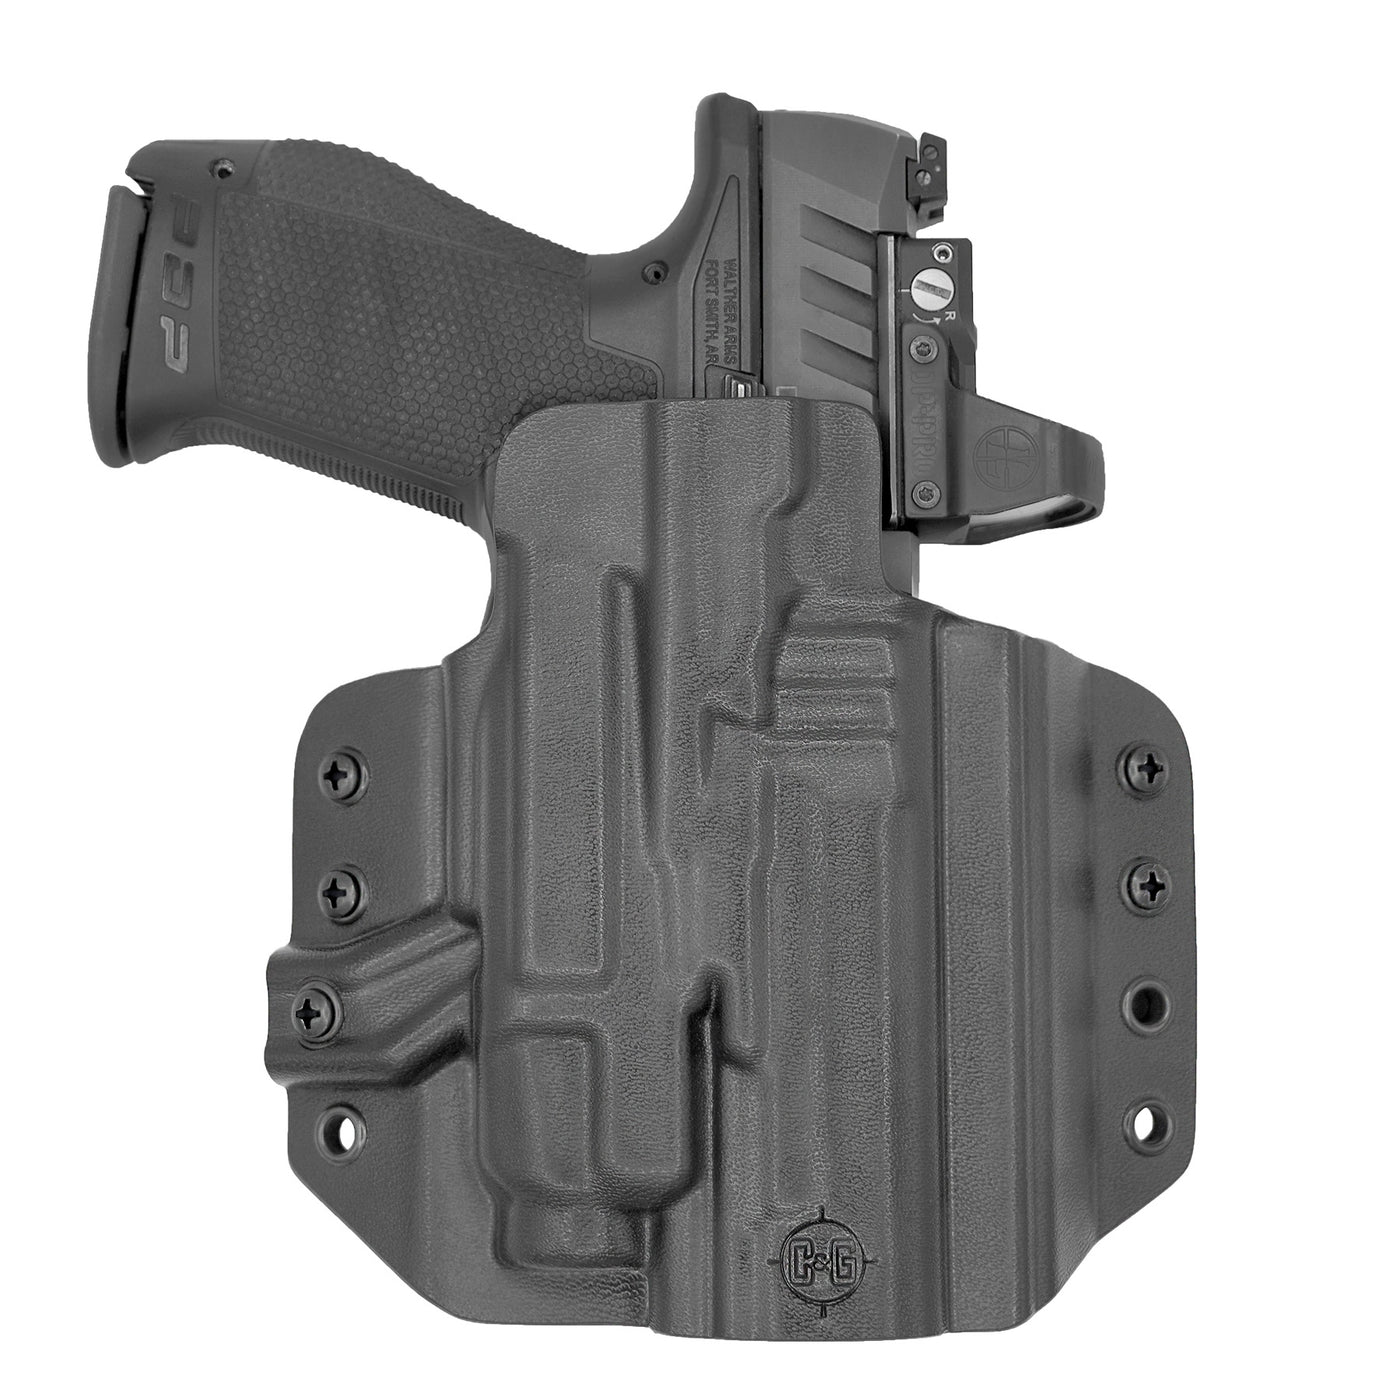 C&G Holsters custom OWB Tactical H&K VP9/sk streamlight tlr7/a in holstered position